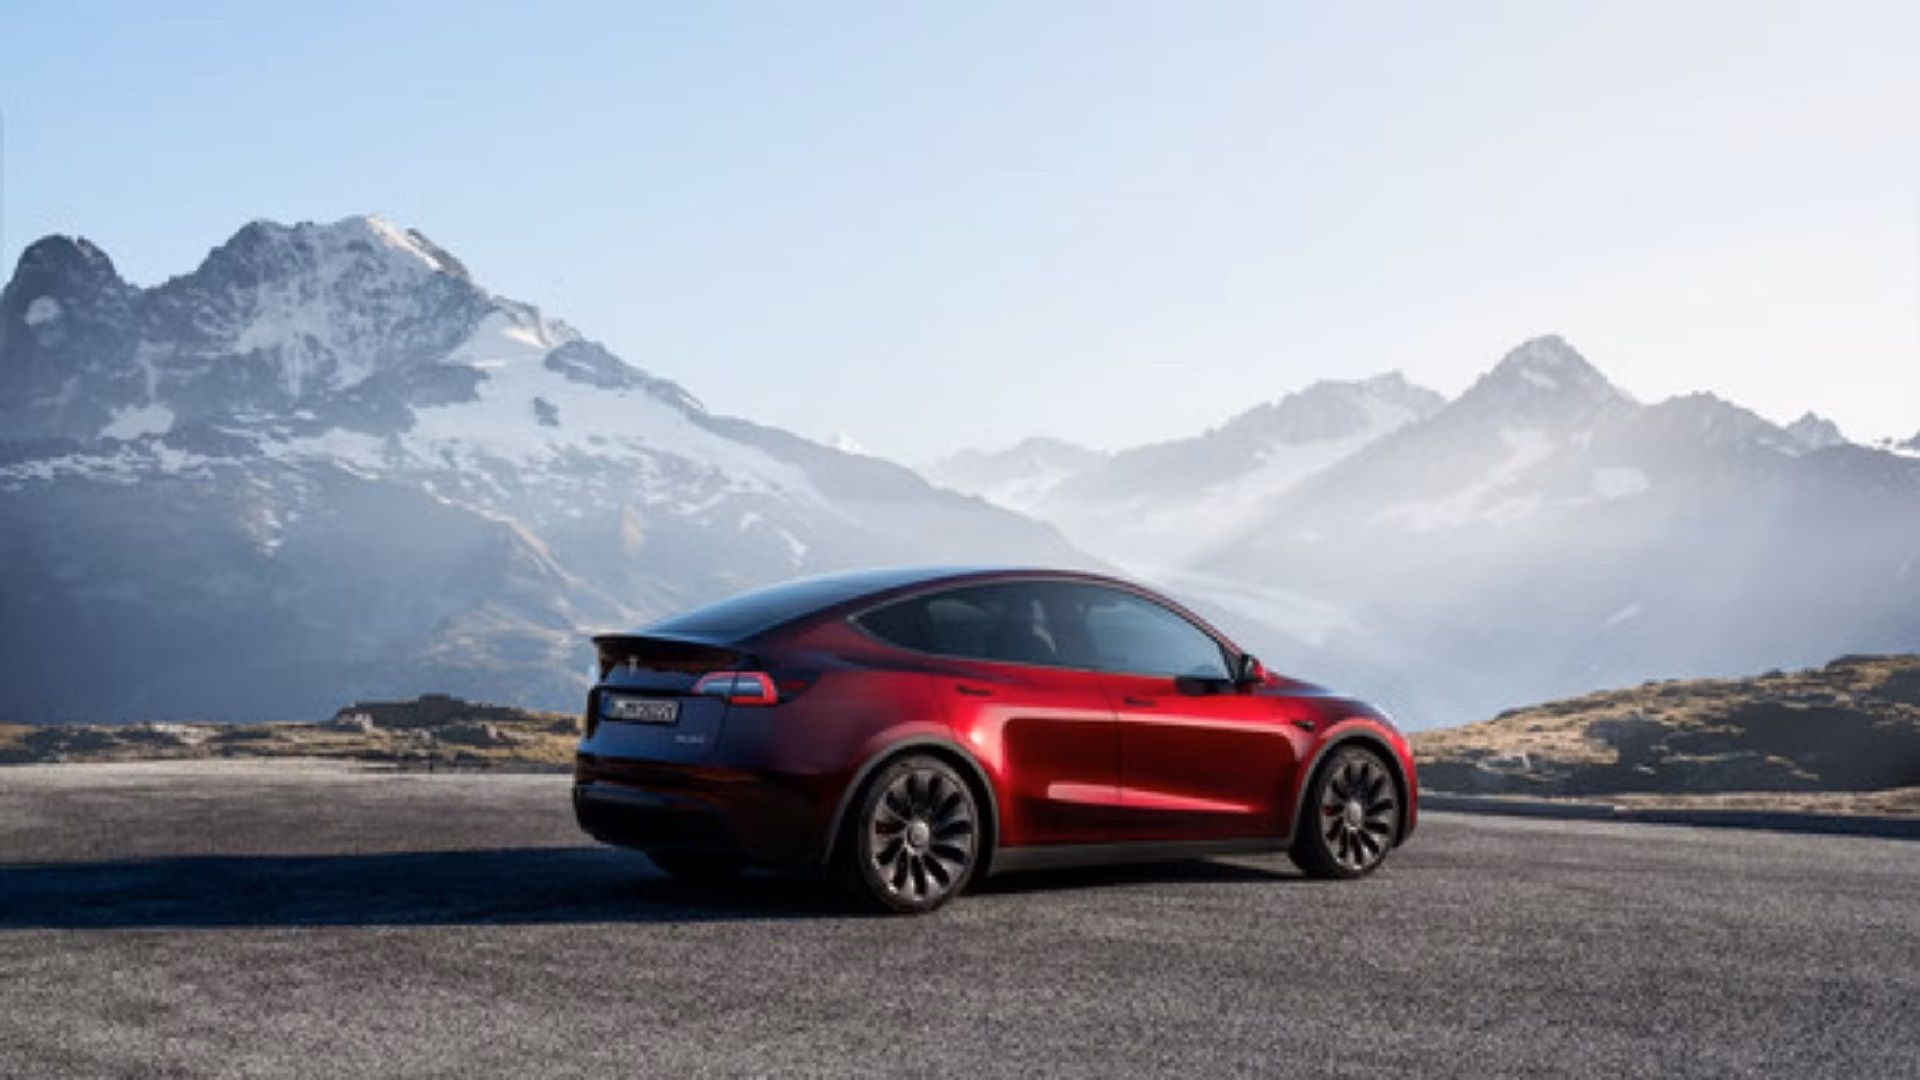 Tesla's clean exterior and minimalist interior are now preferred